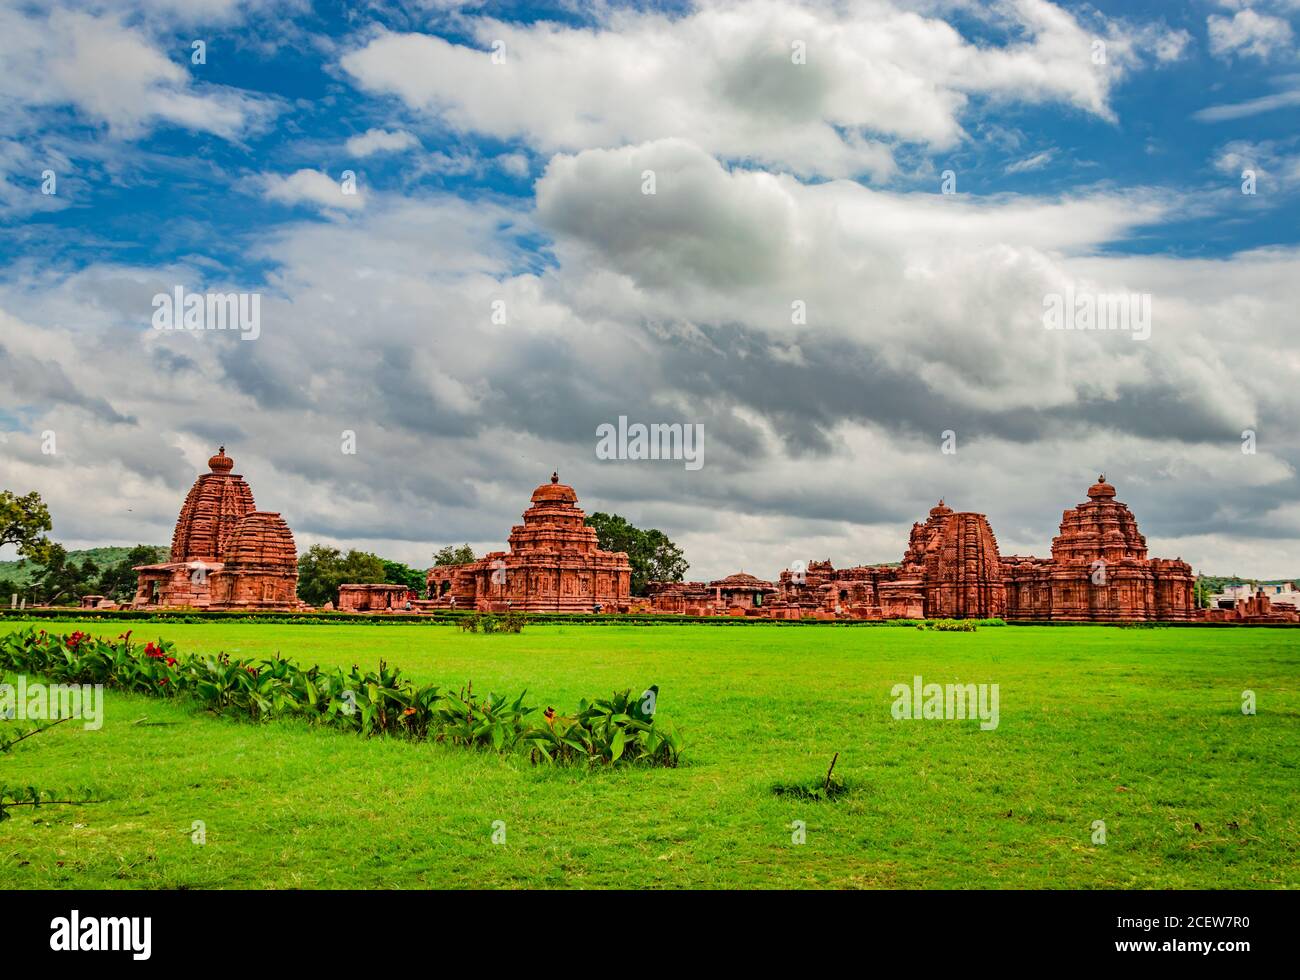 pattadakal temple complex group of monuments breathtaking stone art with dramatic sky karnataka india. It's one of the UNESCO World Heritage Sites and Stock Photo